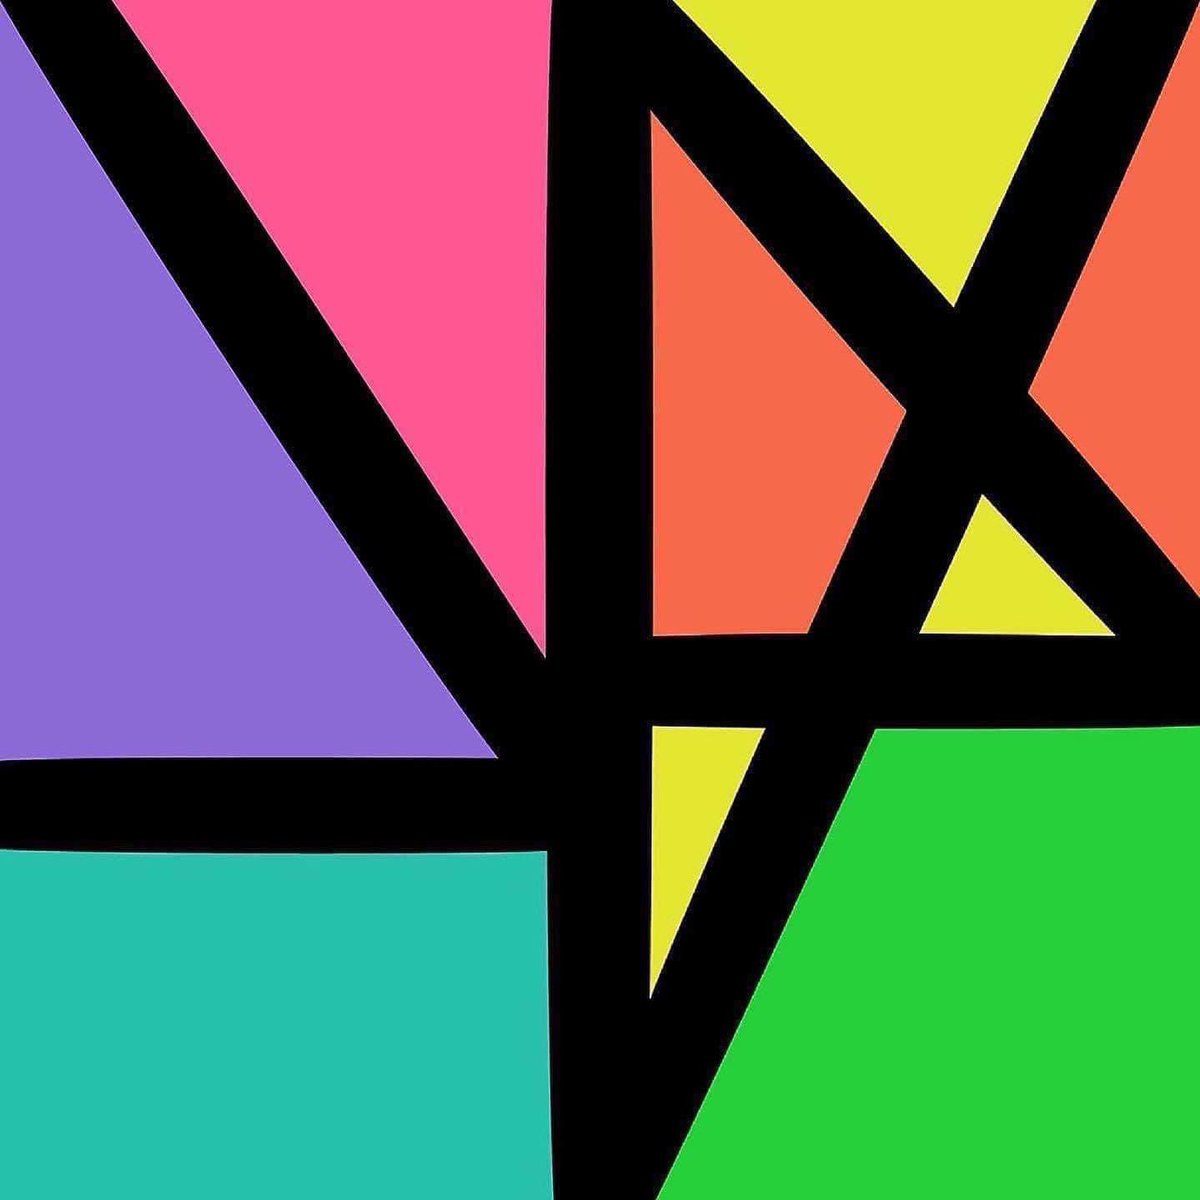 Happy anniversary to New Order’s remix album, ‘Complete Music’ (an extended version album of their fabulous album, ‘Music Complete’). Released this week in 2016. #neworder #completemusic #musiccomplete #restless #tuttifrutti #singularity #peopleonthehighline #petersaville